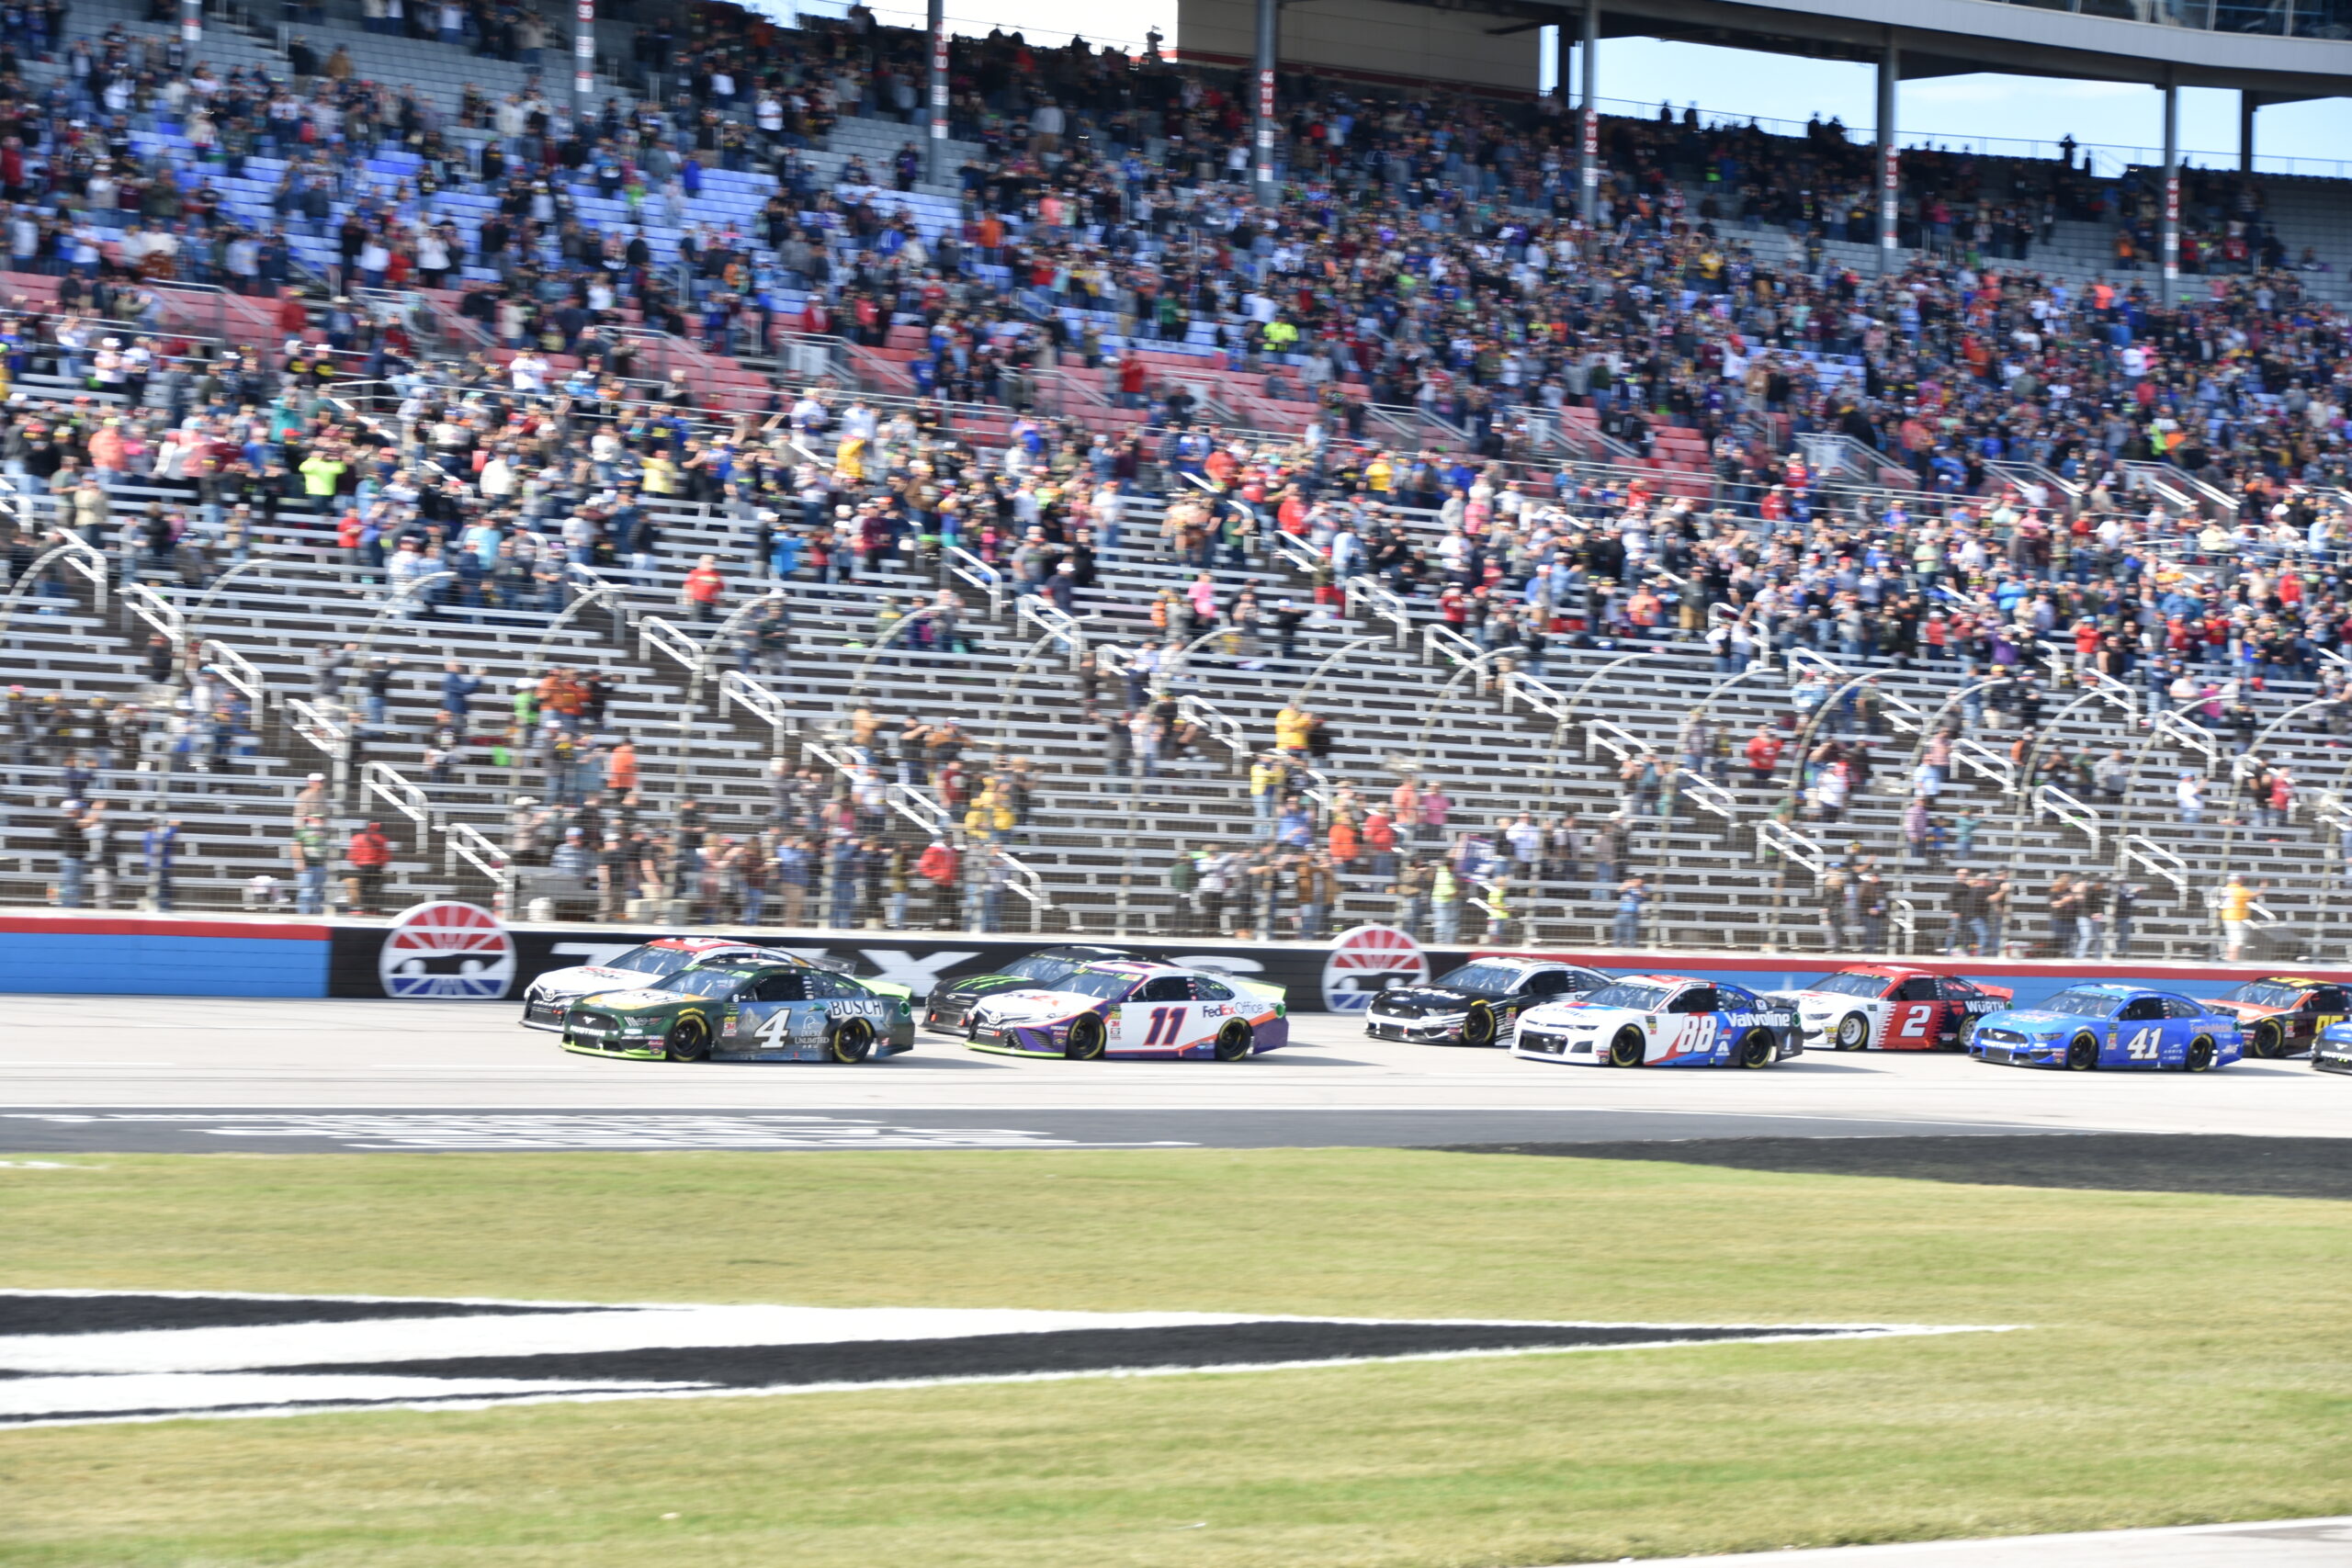 All things considered, today's O'Reilly Auto Parts 500 at Texas may prove as a hotly contested NASCAR Cup Series race! (Photo Credit: Sean Folsom/TPF)